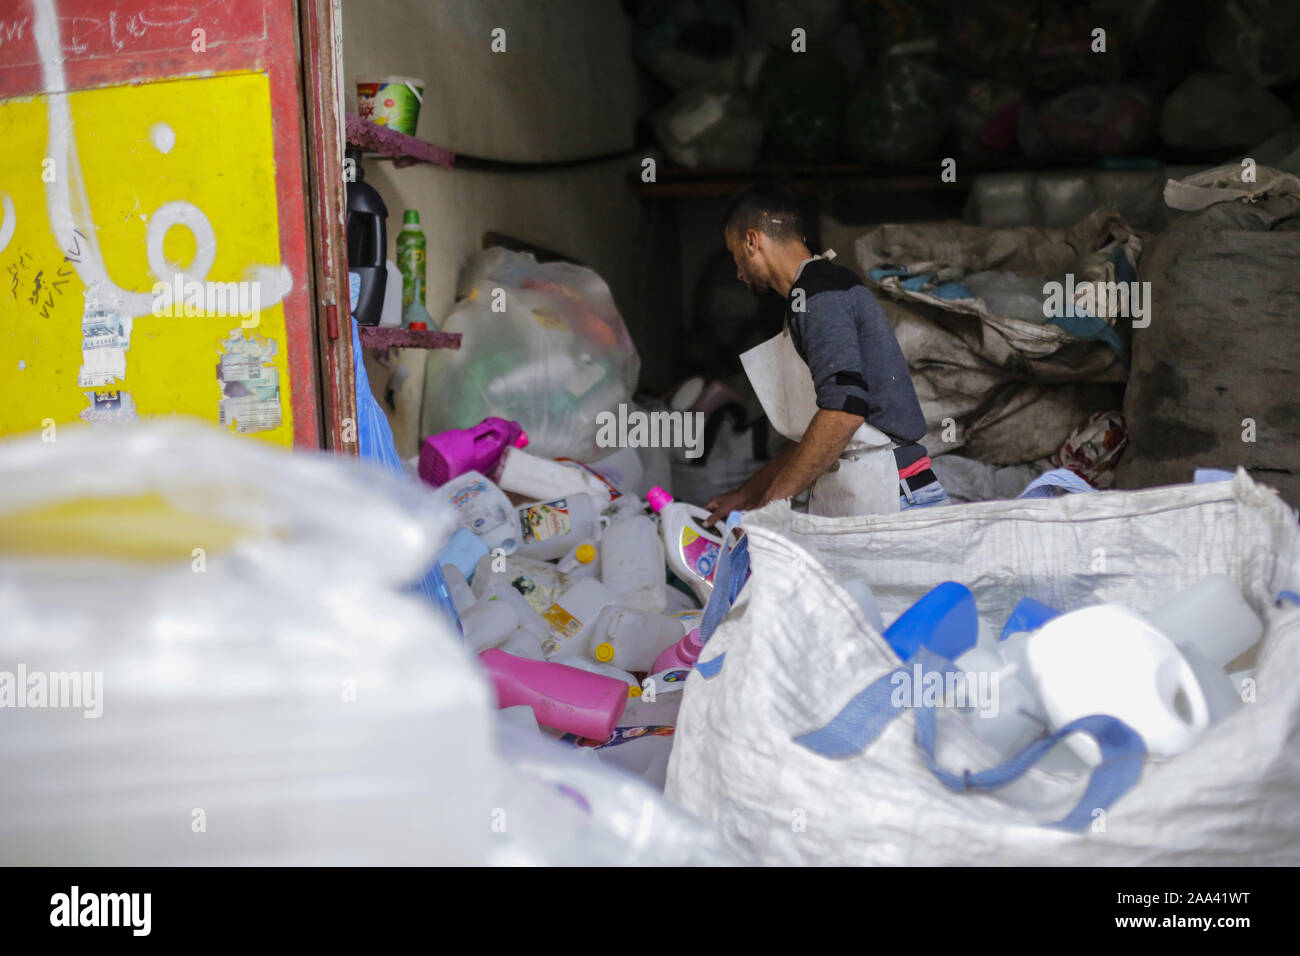 Gaza City, The Gaza Strip, Palestine. 19th Nov, 2019. Palestinian youth collect plastic and metal from the garbage piles in Jabalia camp, northern Gaza Strip on November 19, 2019. Young people spend 15 hours a day roaming the streets looking for minerals and plastic for sale to traders and get paid about US $ 2.5 per day. Credit: Mahmoud Issa/Quds Net News/ZUMA Wire/Alamy Live News Stock Photo